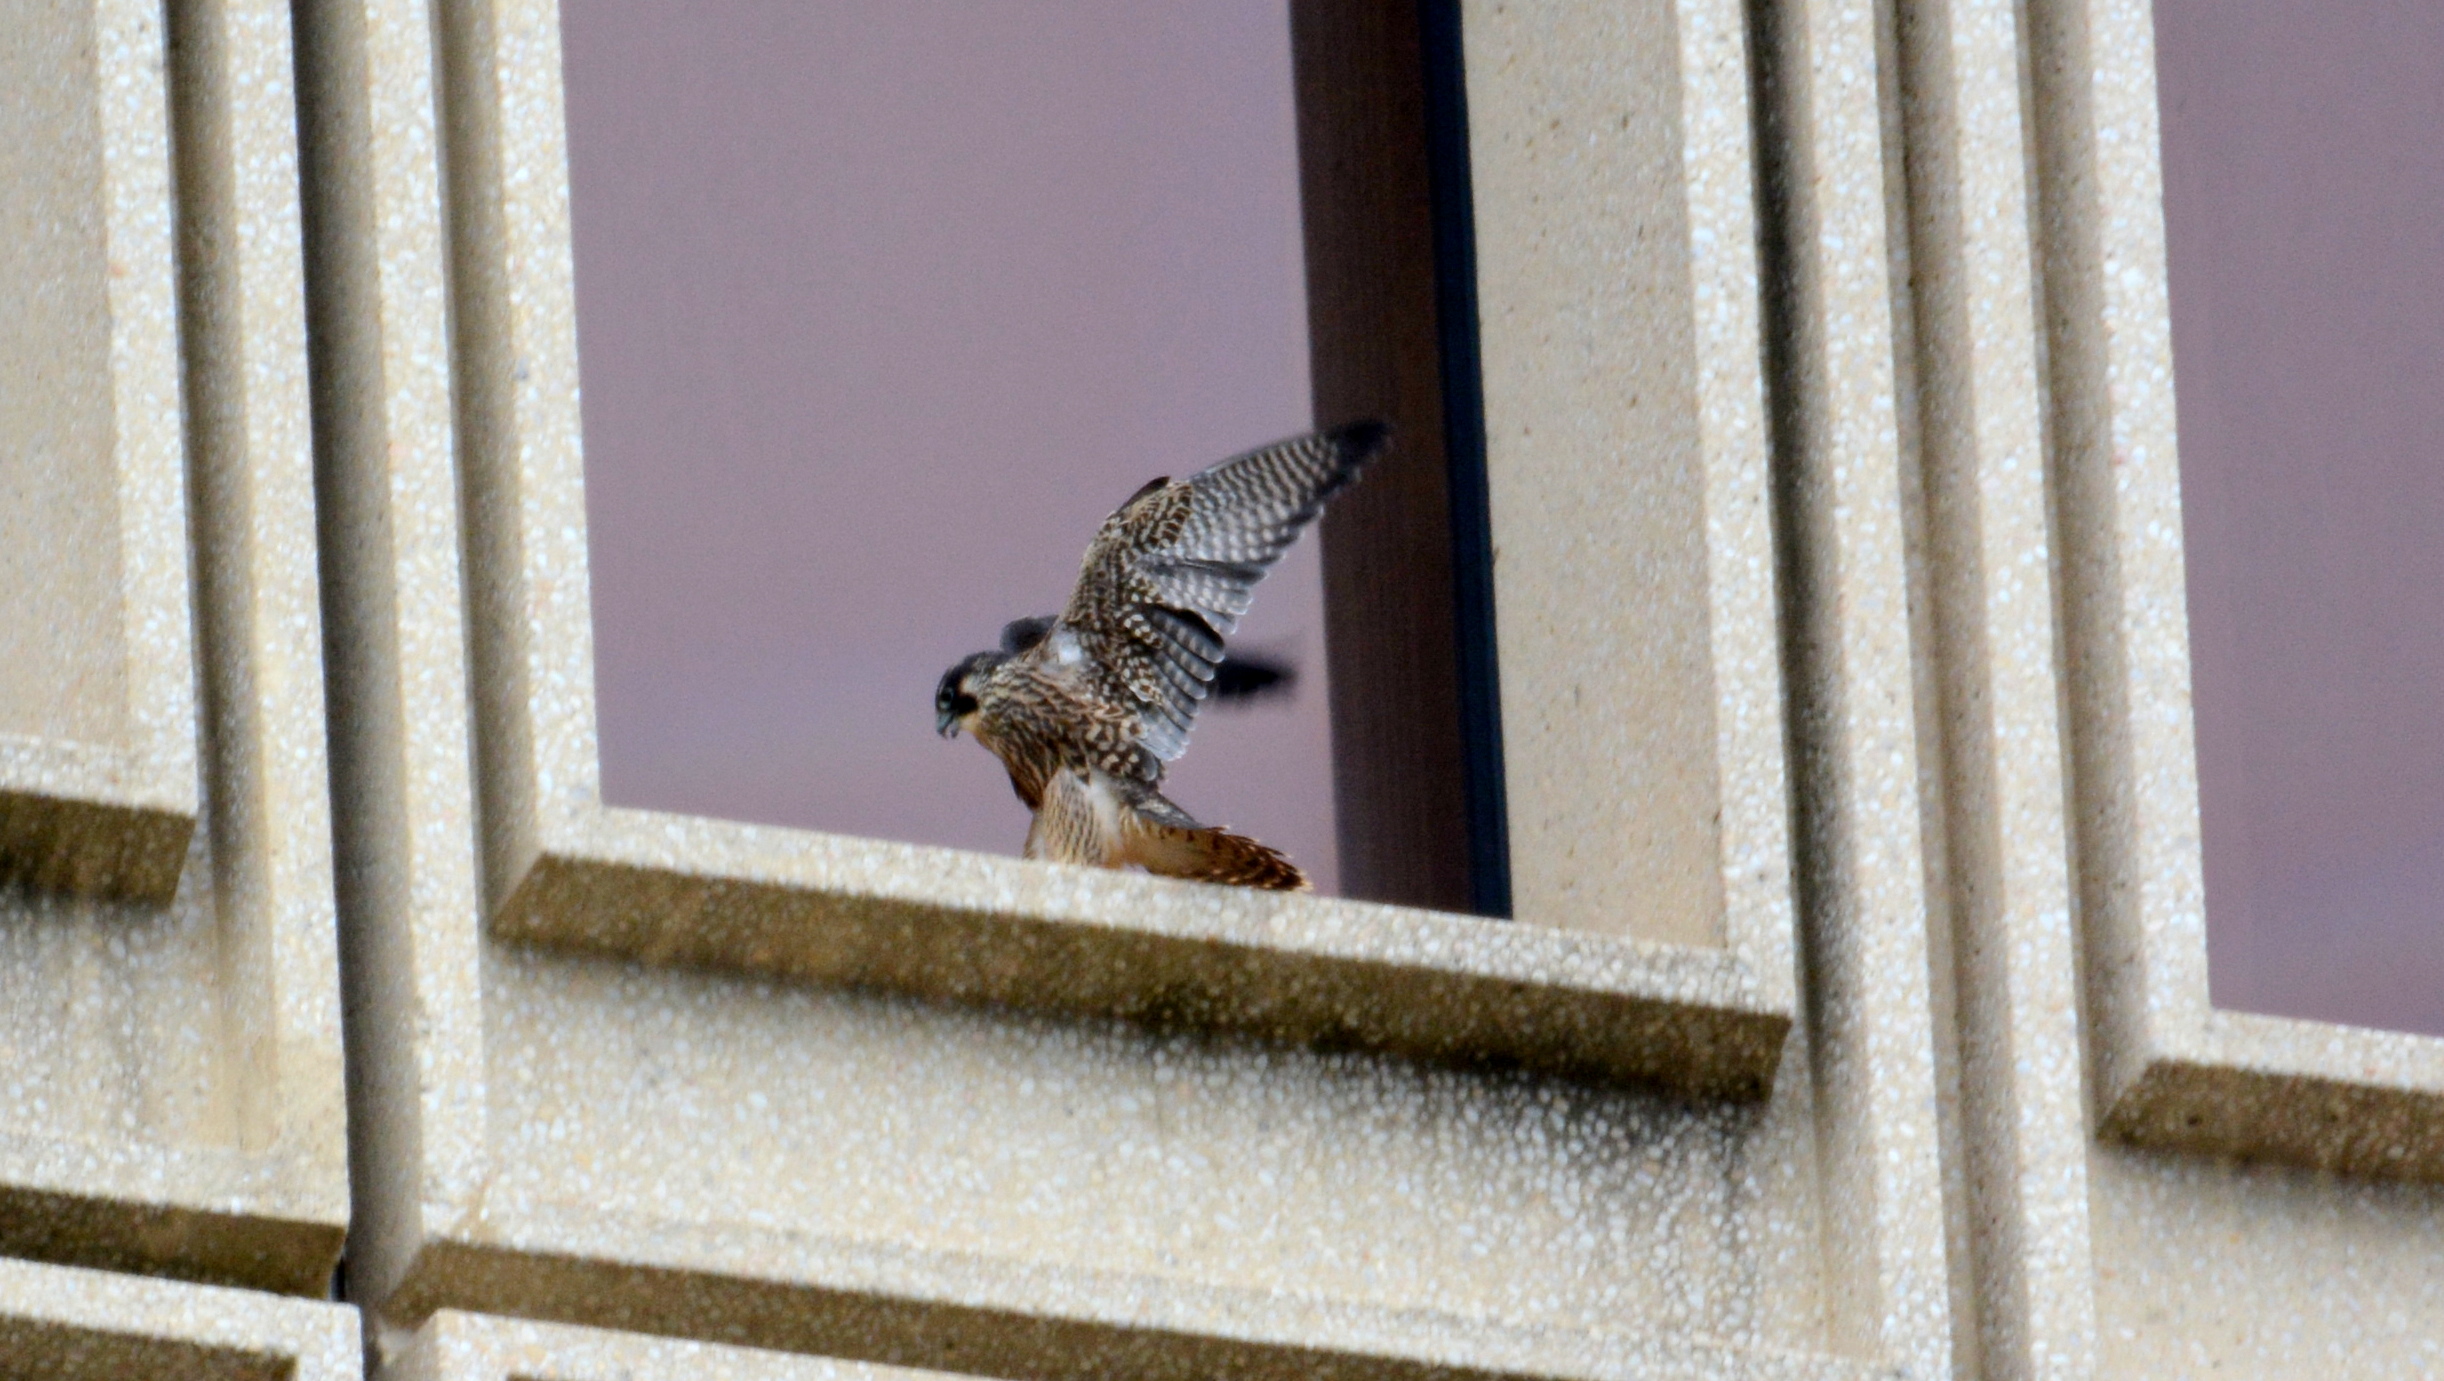 Coming in for a landing on a window ledge